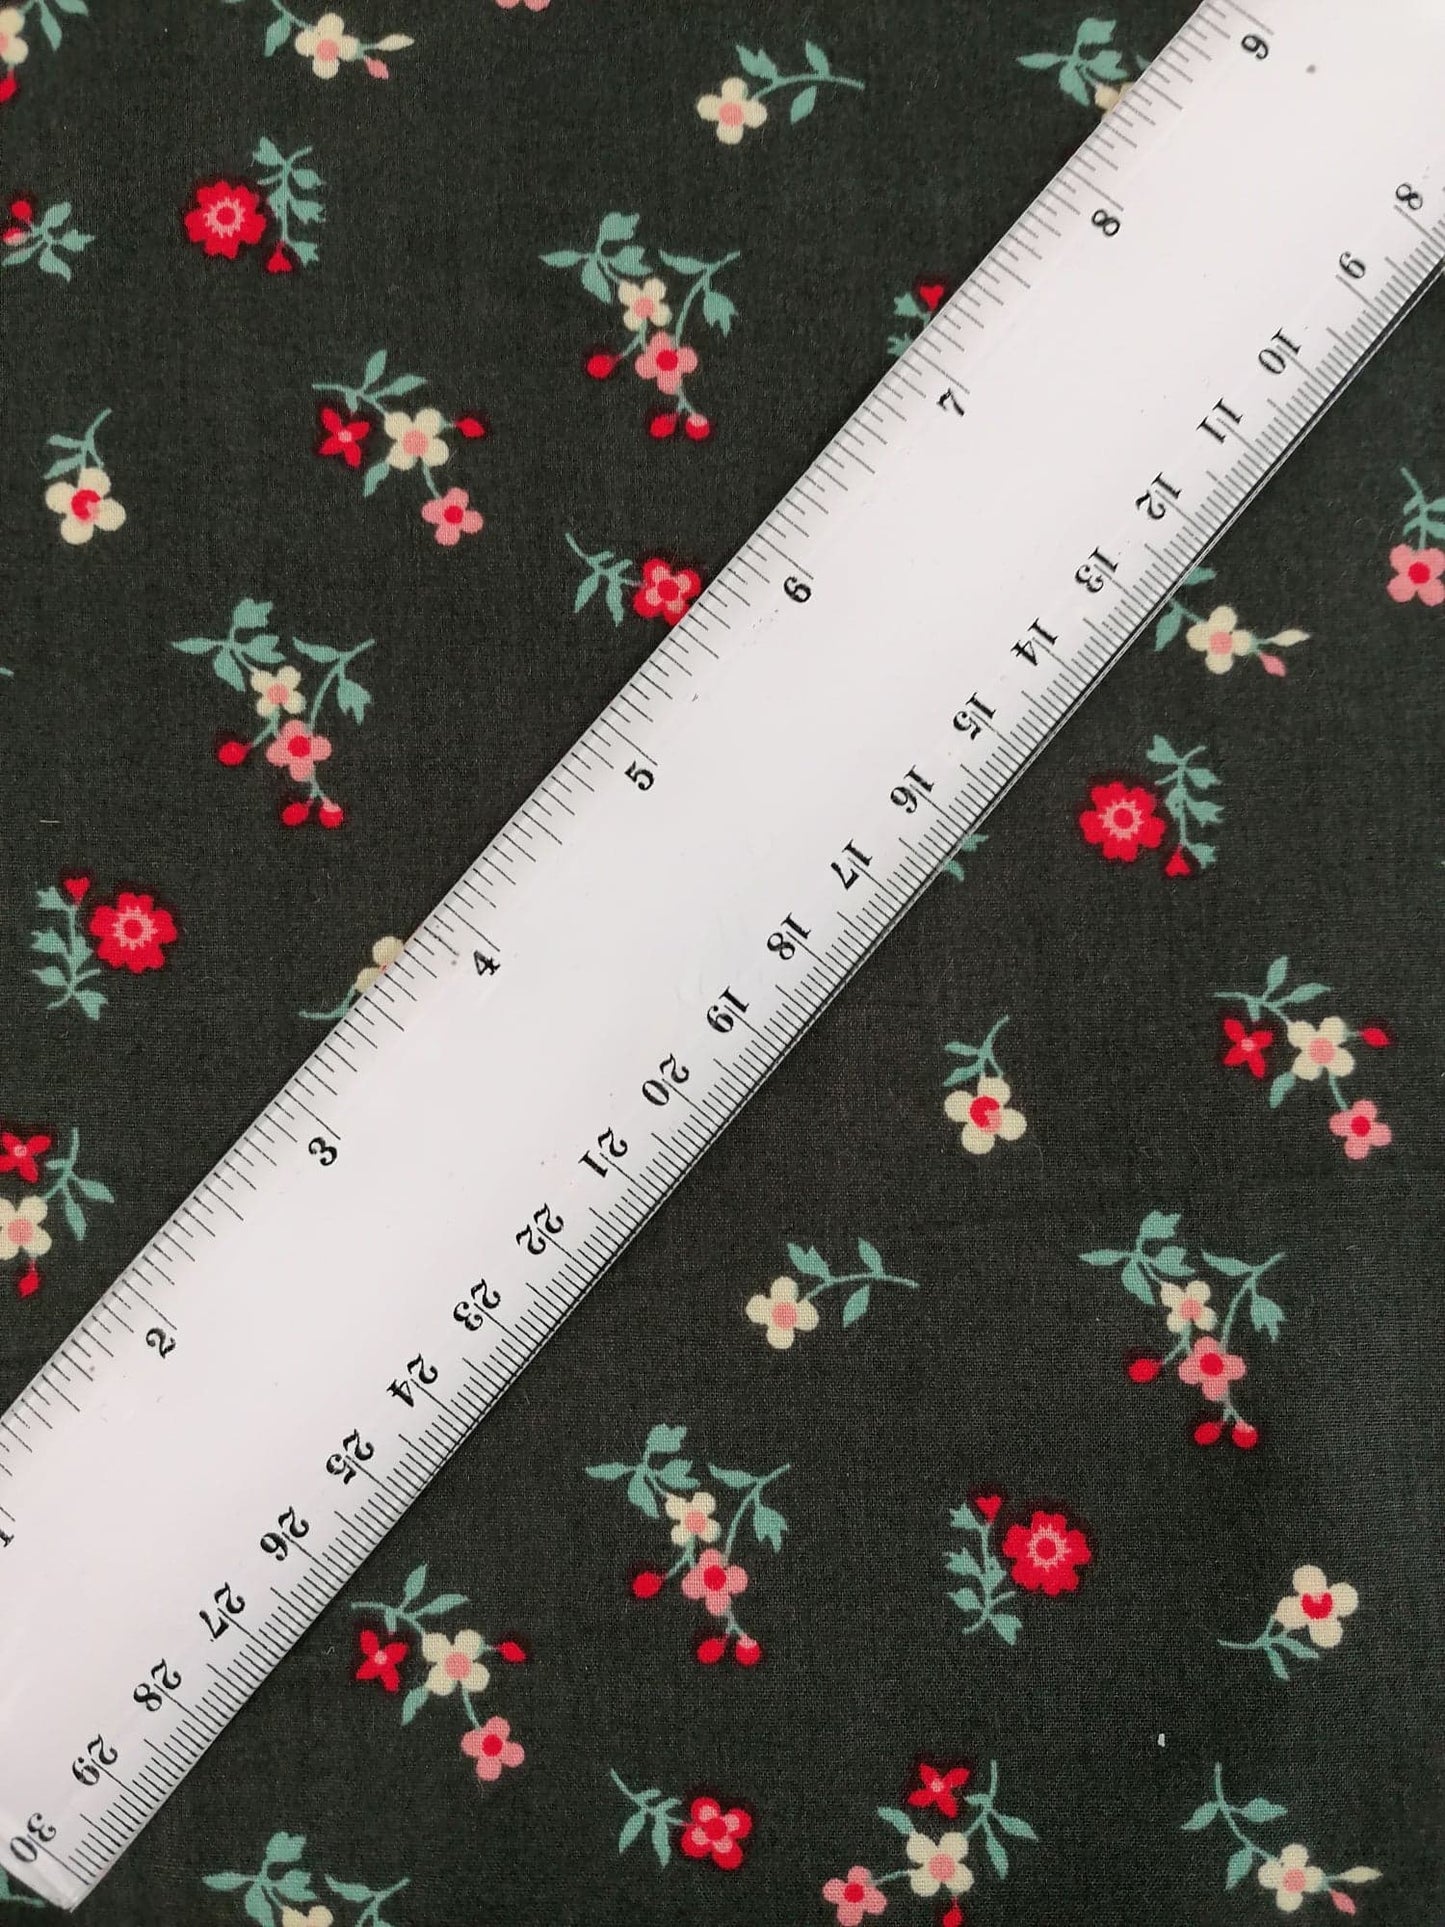 100% Cotton - Crafting & Quilting - Ditsy Floral - Black/Red/Yellow/Green - 44" Wide - Sold By the Metre